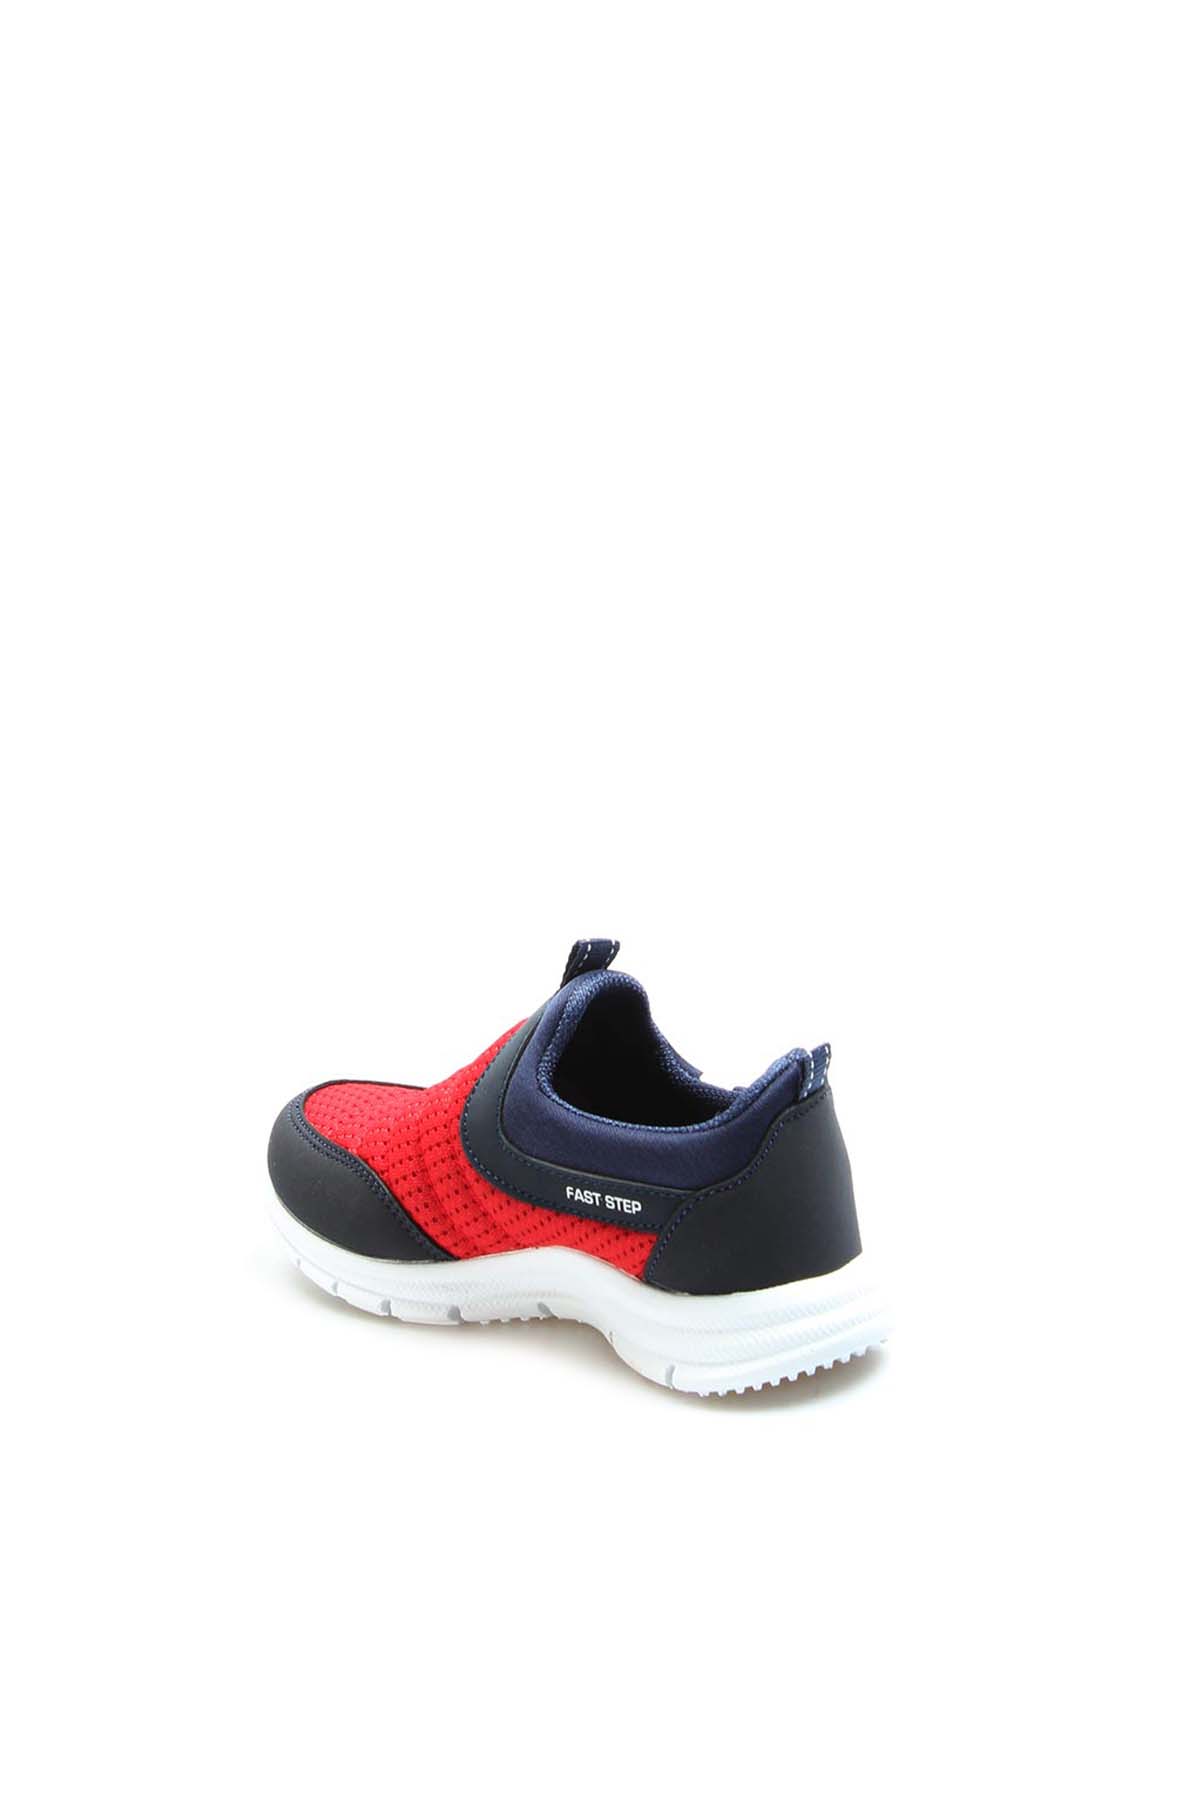 Fast Step Kids Unisex Boys Sport Shoes Red Navy Blue 868PA1006